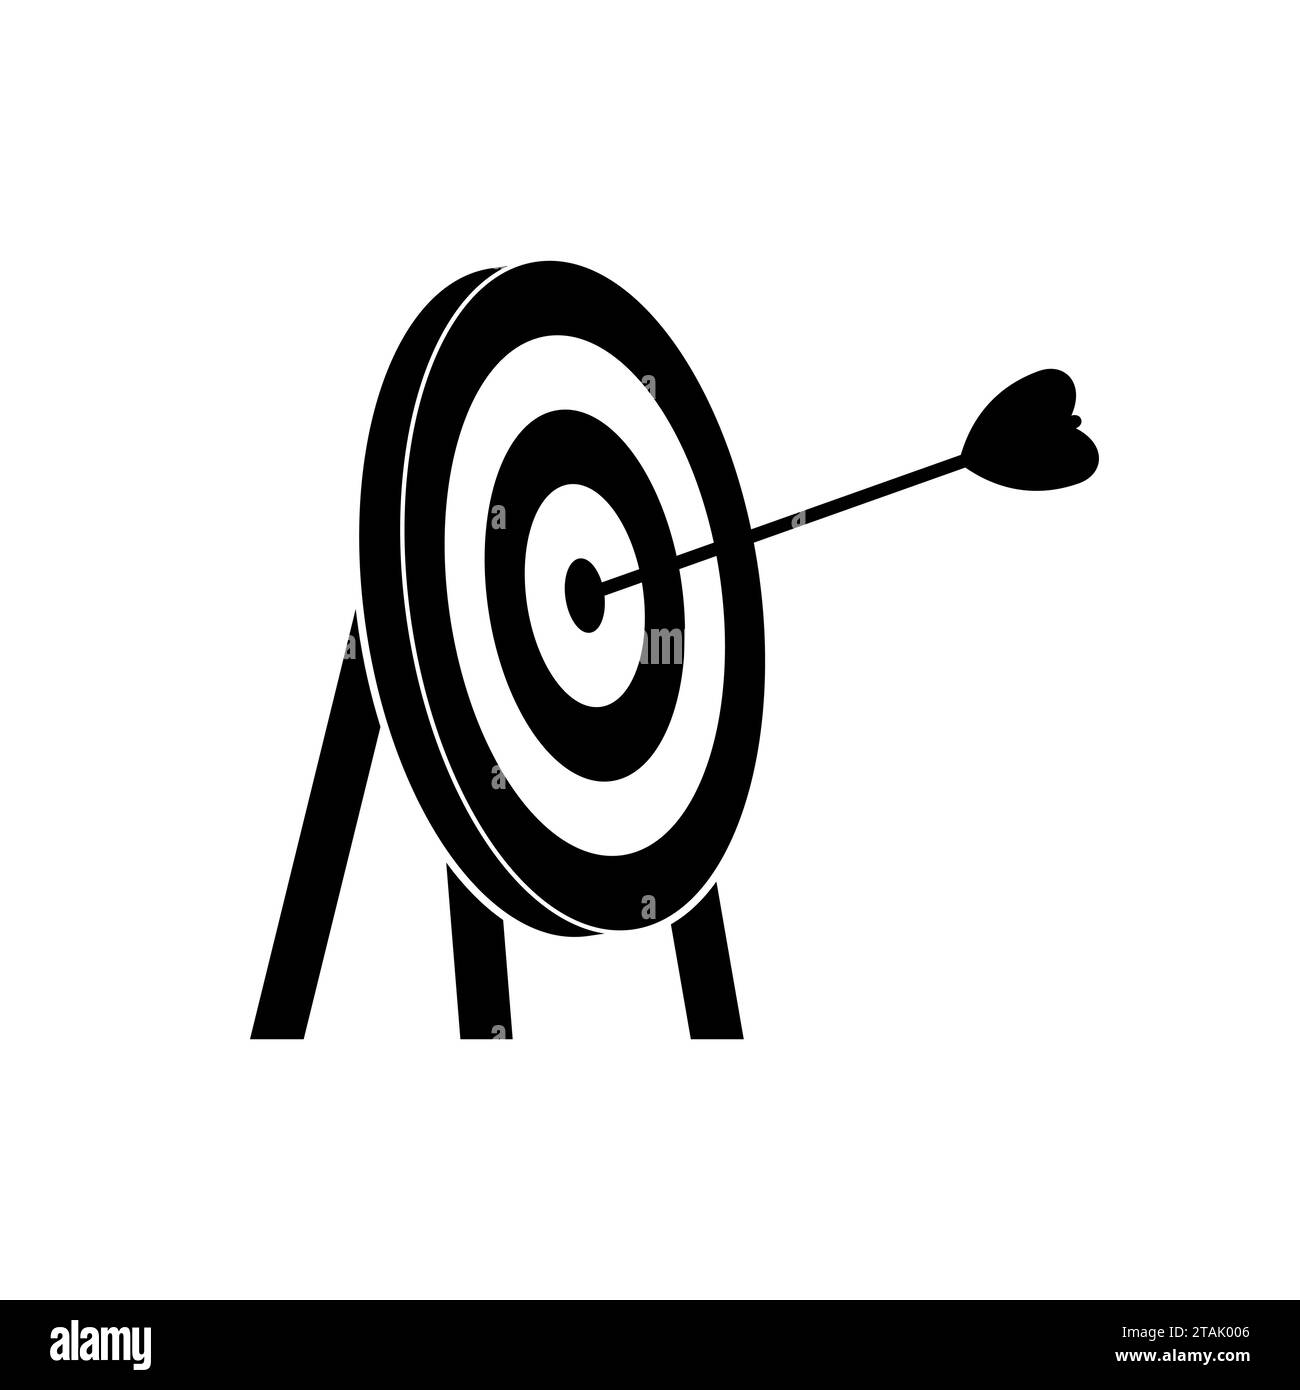 Arrow and target icon isolated on white background. Arrow hit the bullseye. Goal achieving idea. Business success and failure symbol. Efficiency Stock Vector